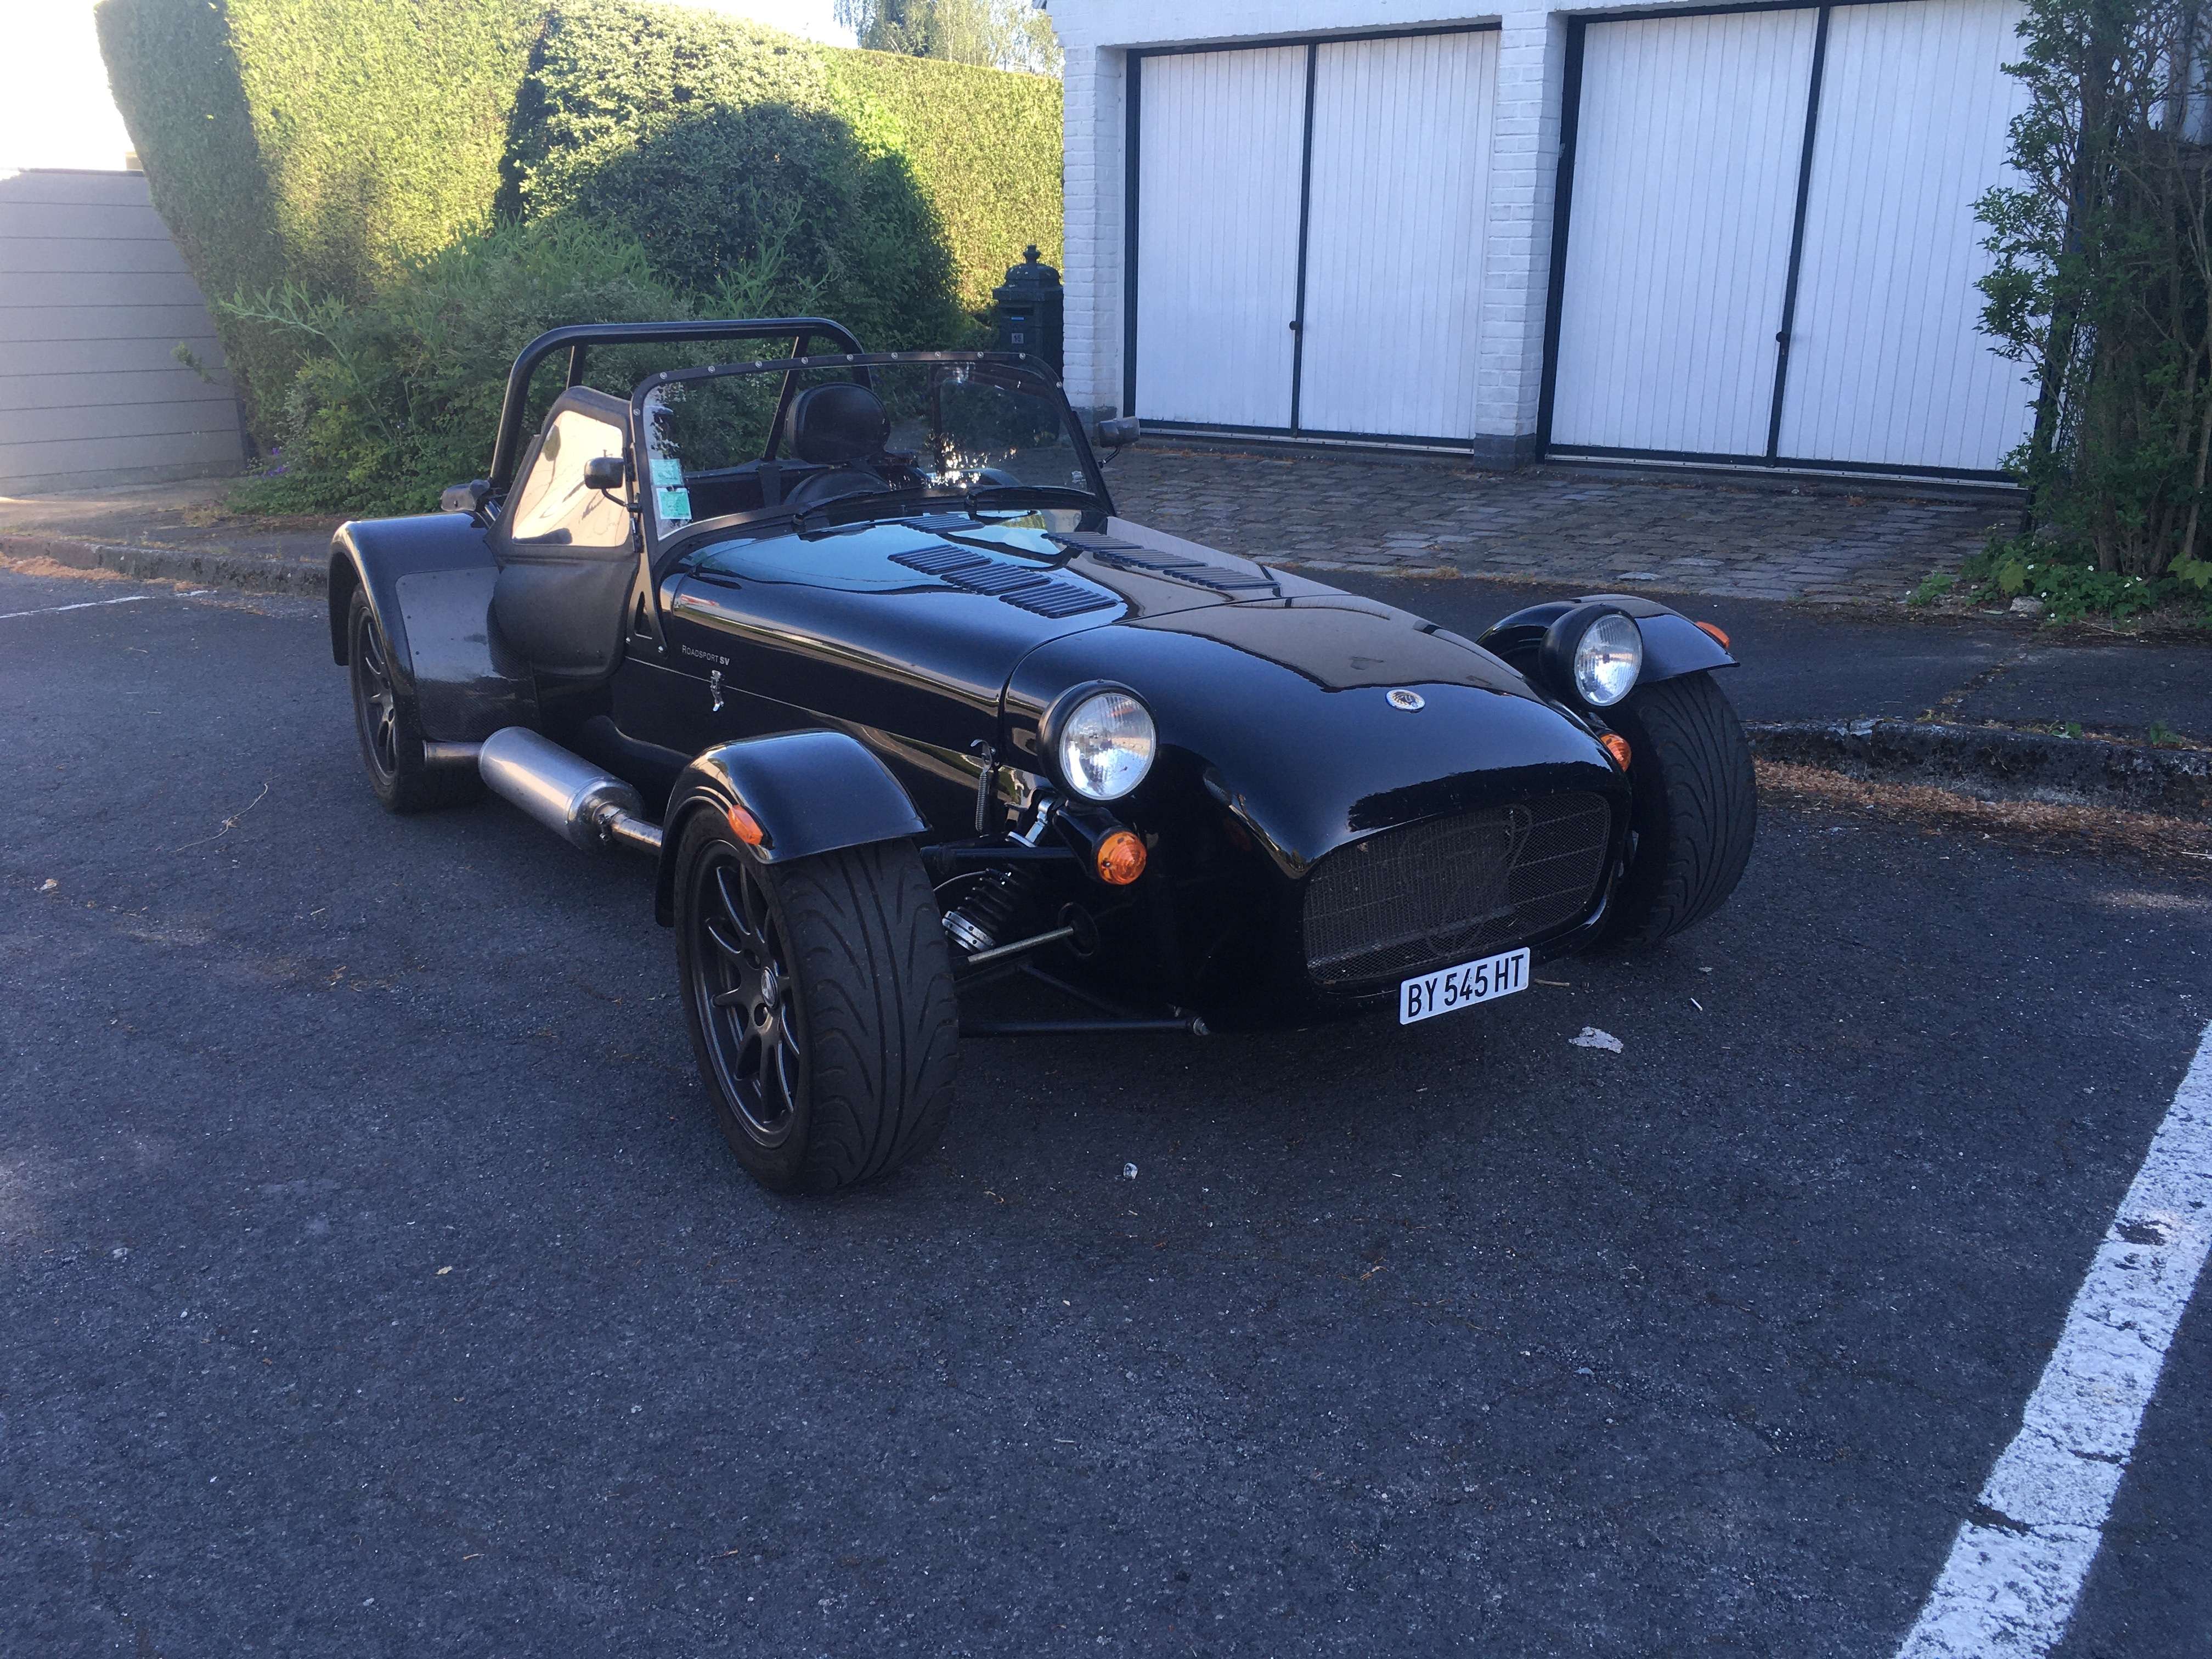 Caterham Seven 270 Convertible in Black used in Aulnoy lez valenciennes for € 39,000.-